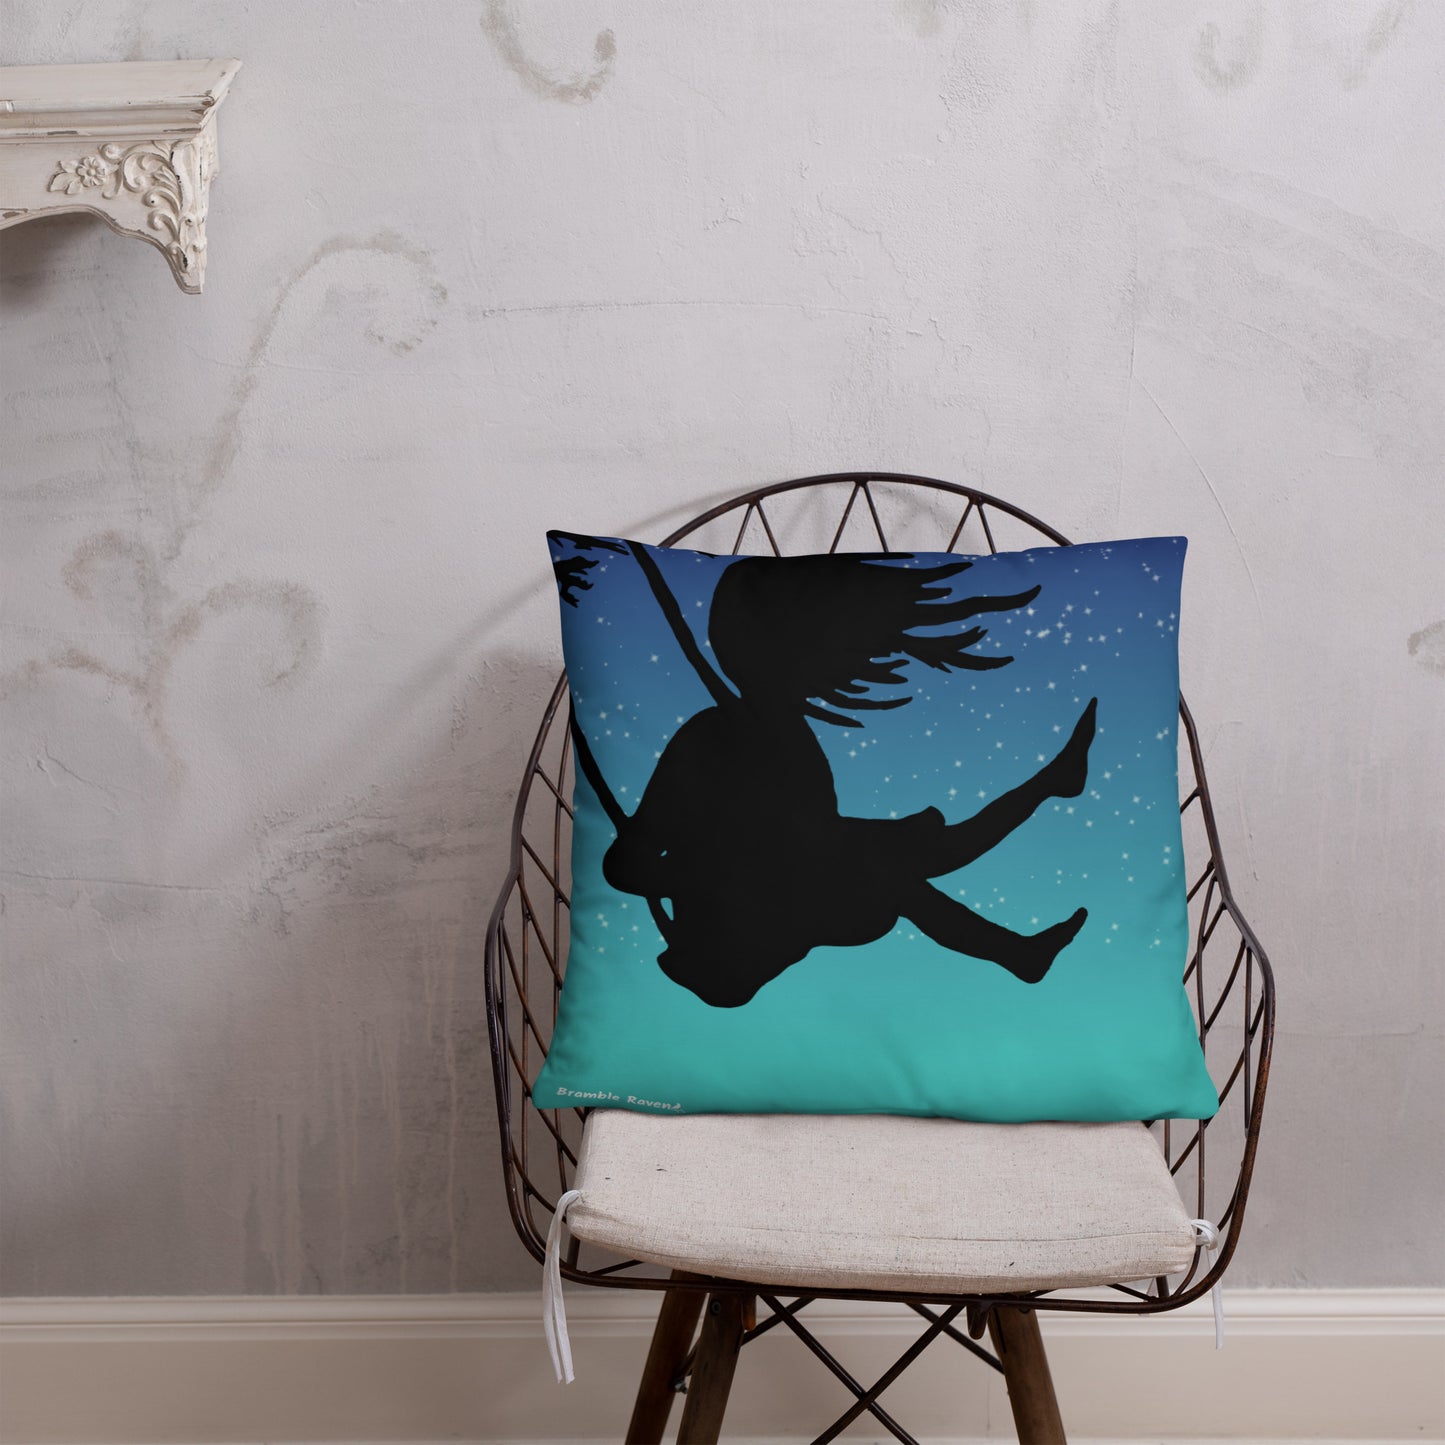 Original Swing Free design of a girl's silhouette in a tree swing against the backdrop of a blue starry sky. Rectangular image on front of pillow with blue background fabric. Pillow has design on both sides. 22 by 22 inch accent pillow. Back image shown on wicker chair.